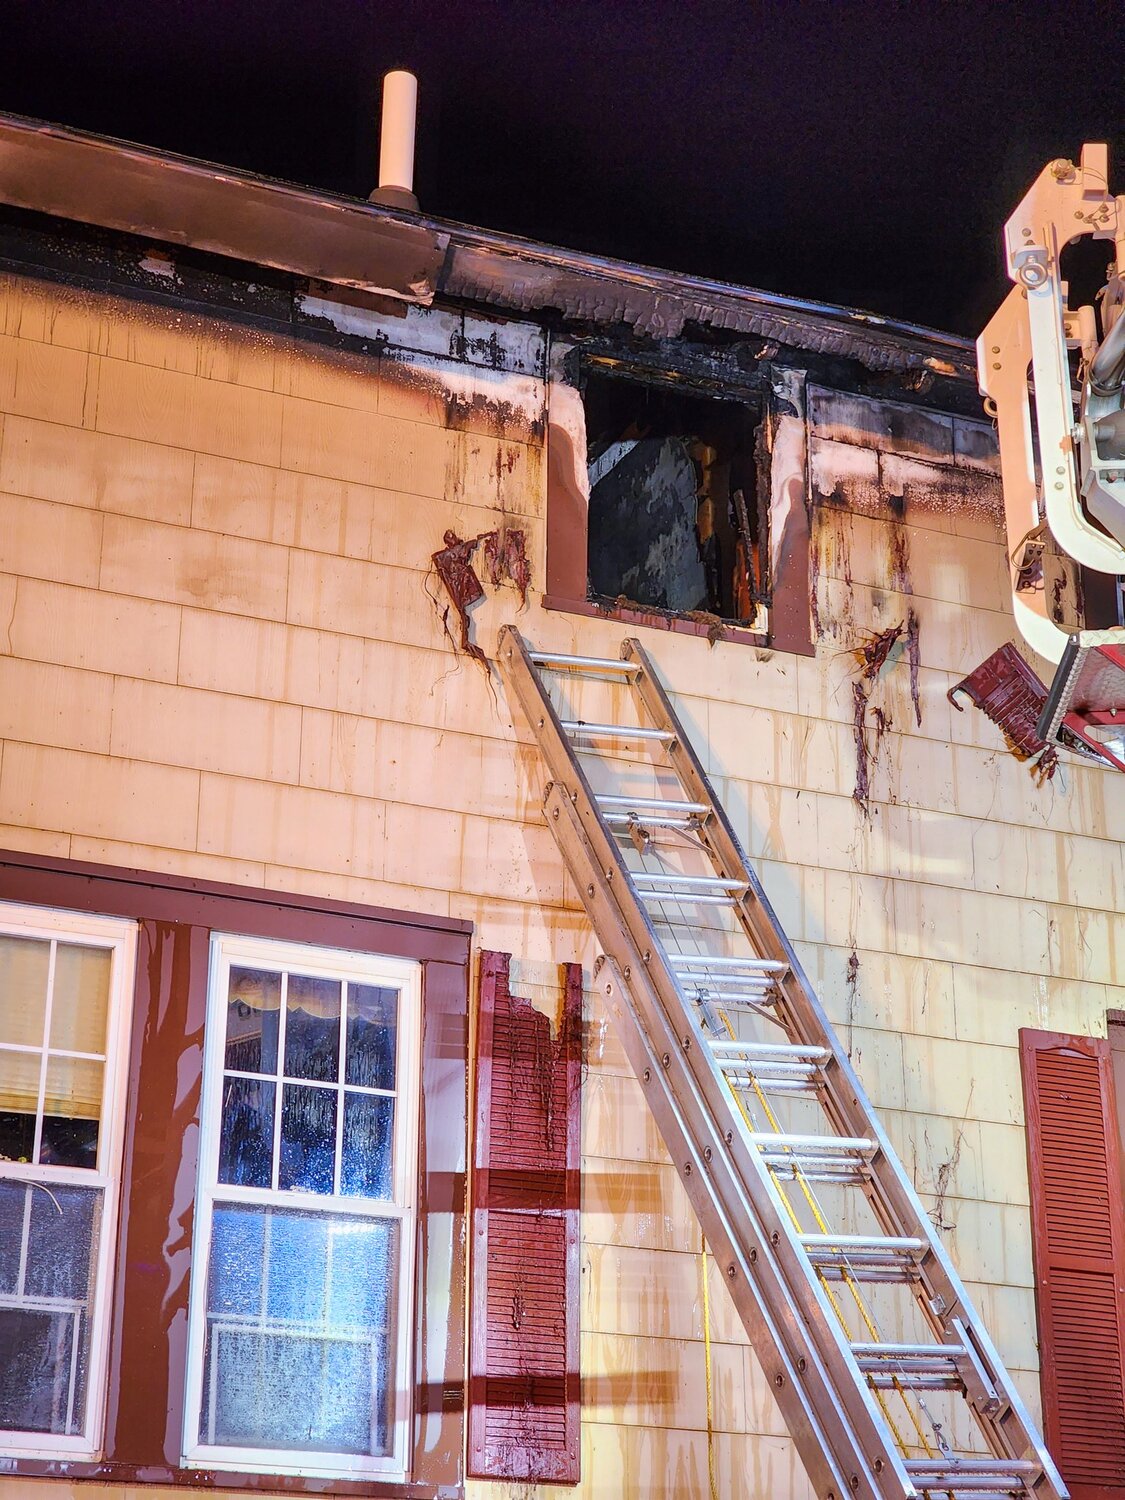 The fire was reported under control at 9:06 p.m. The New Hartford Fire Department, the Clayville Fire Department, the Sauquoit Fire Company, Yorkville Fire & Hose Co. Inc., and Edwards Ambulance, Inc. provided aid to the Willowvale Fire Company, Inc.